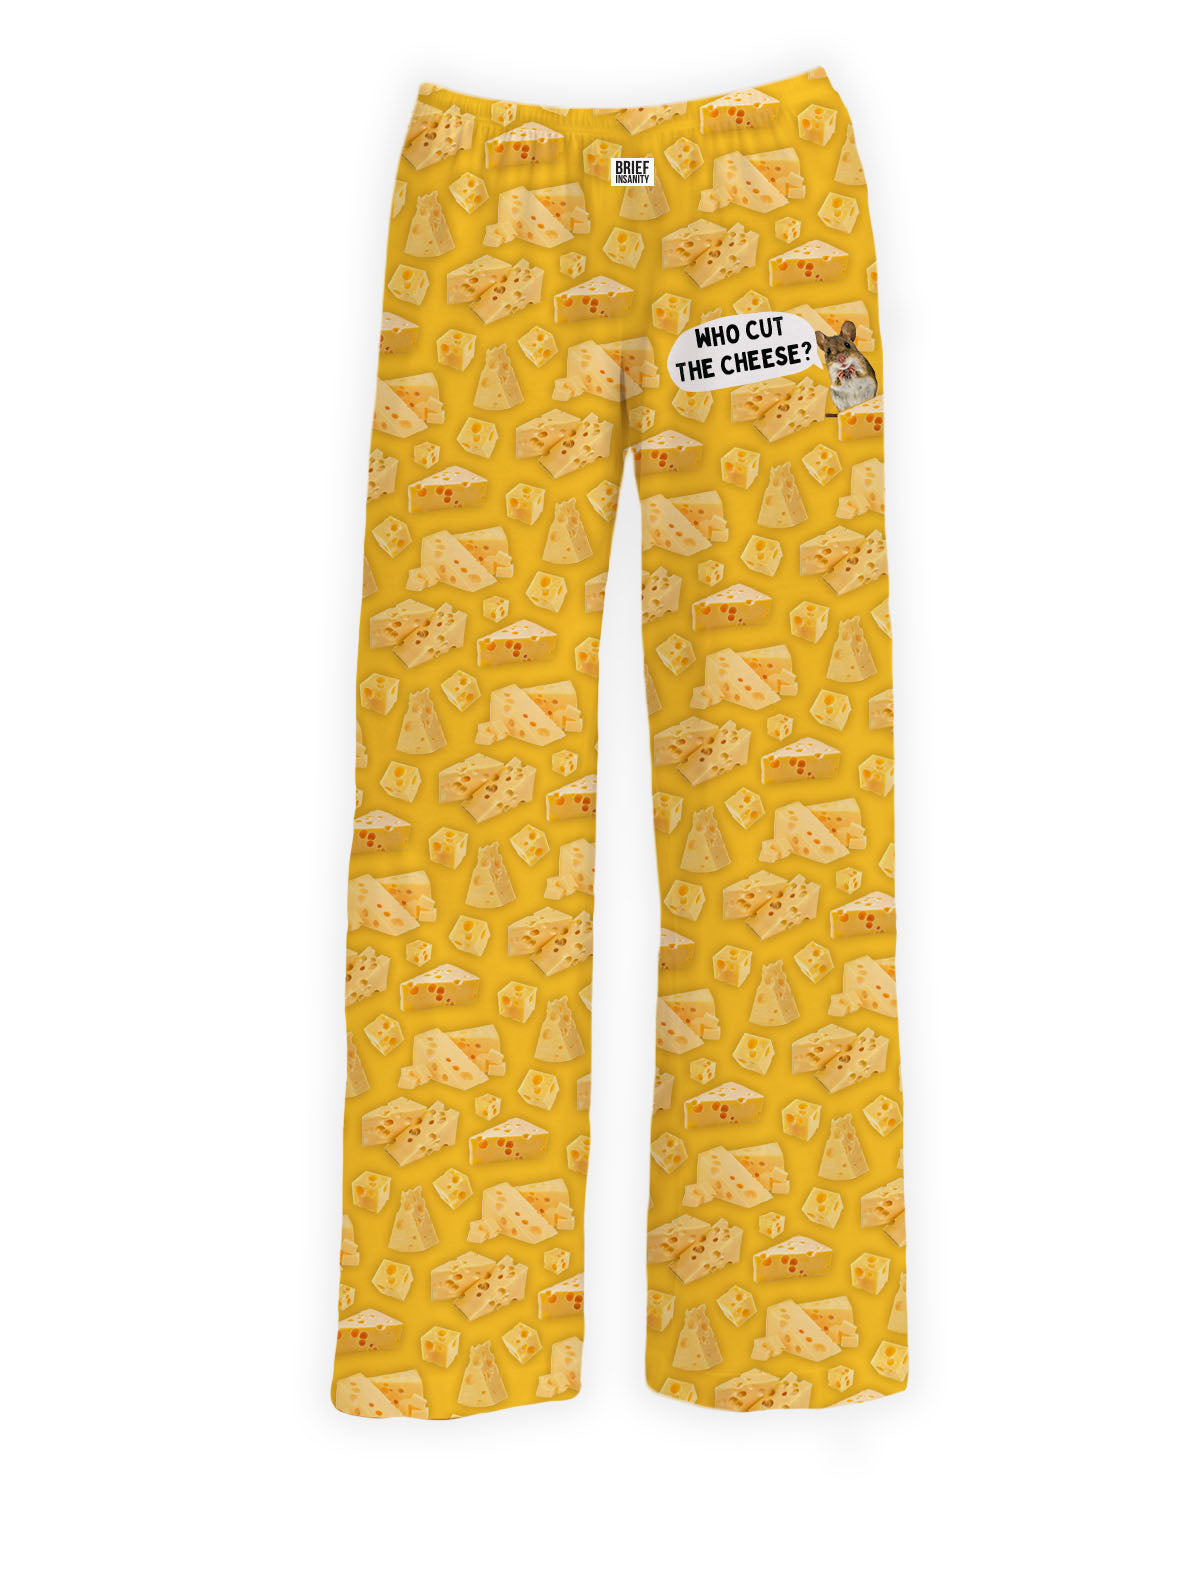 BRIEF INSANITY Who Cut the Cheese Pajama Lounge Pants